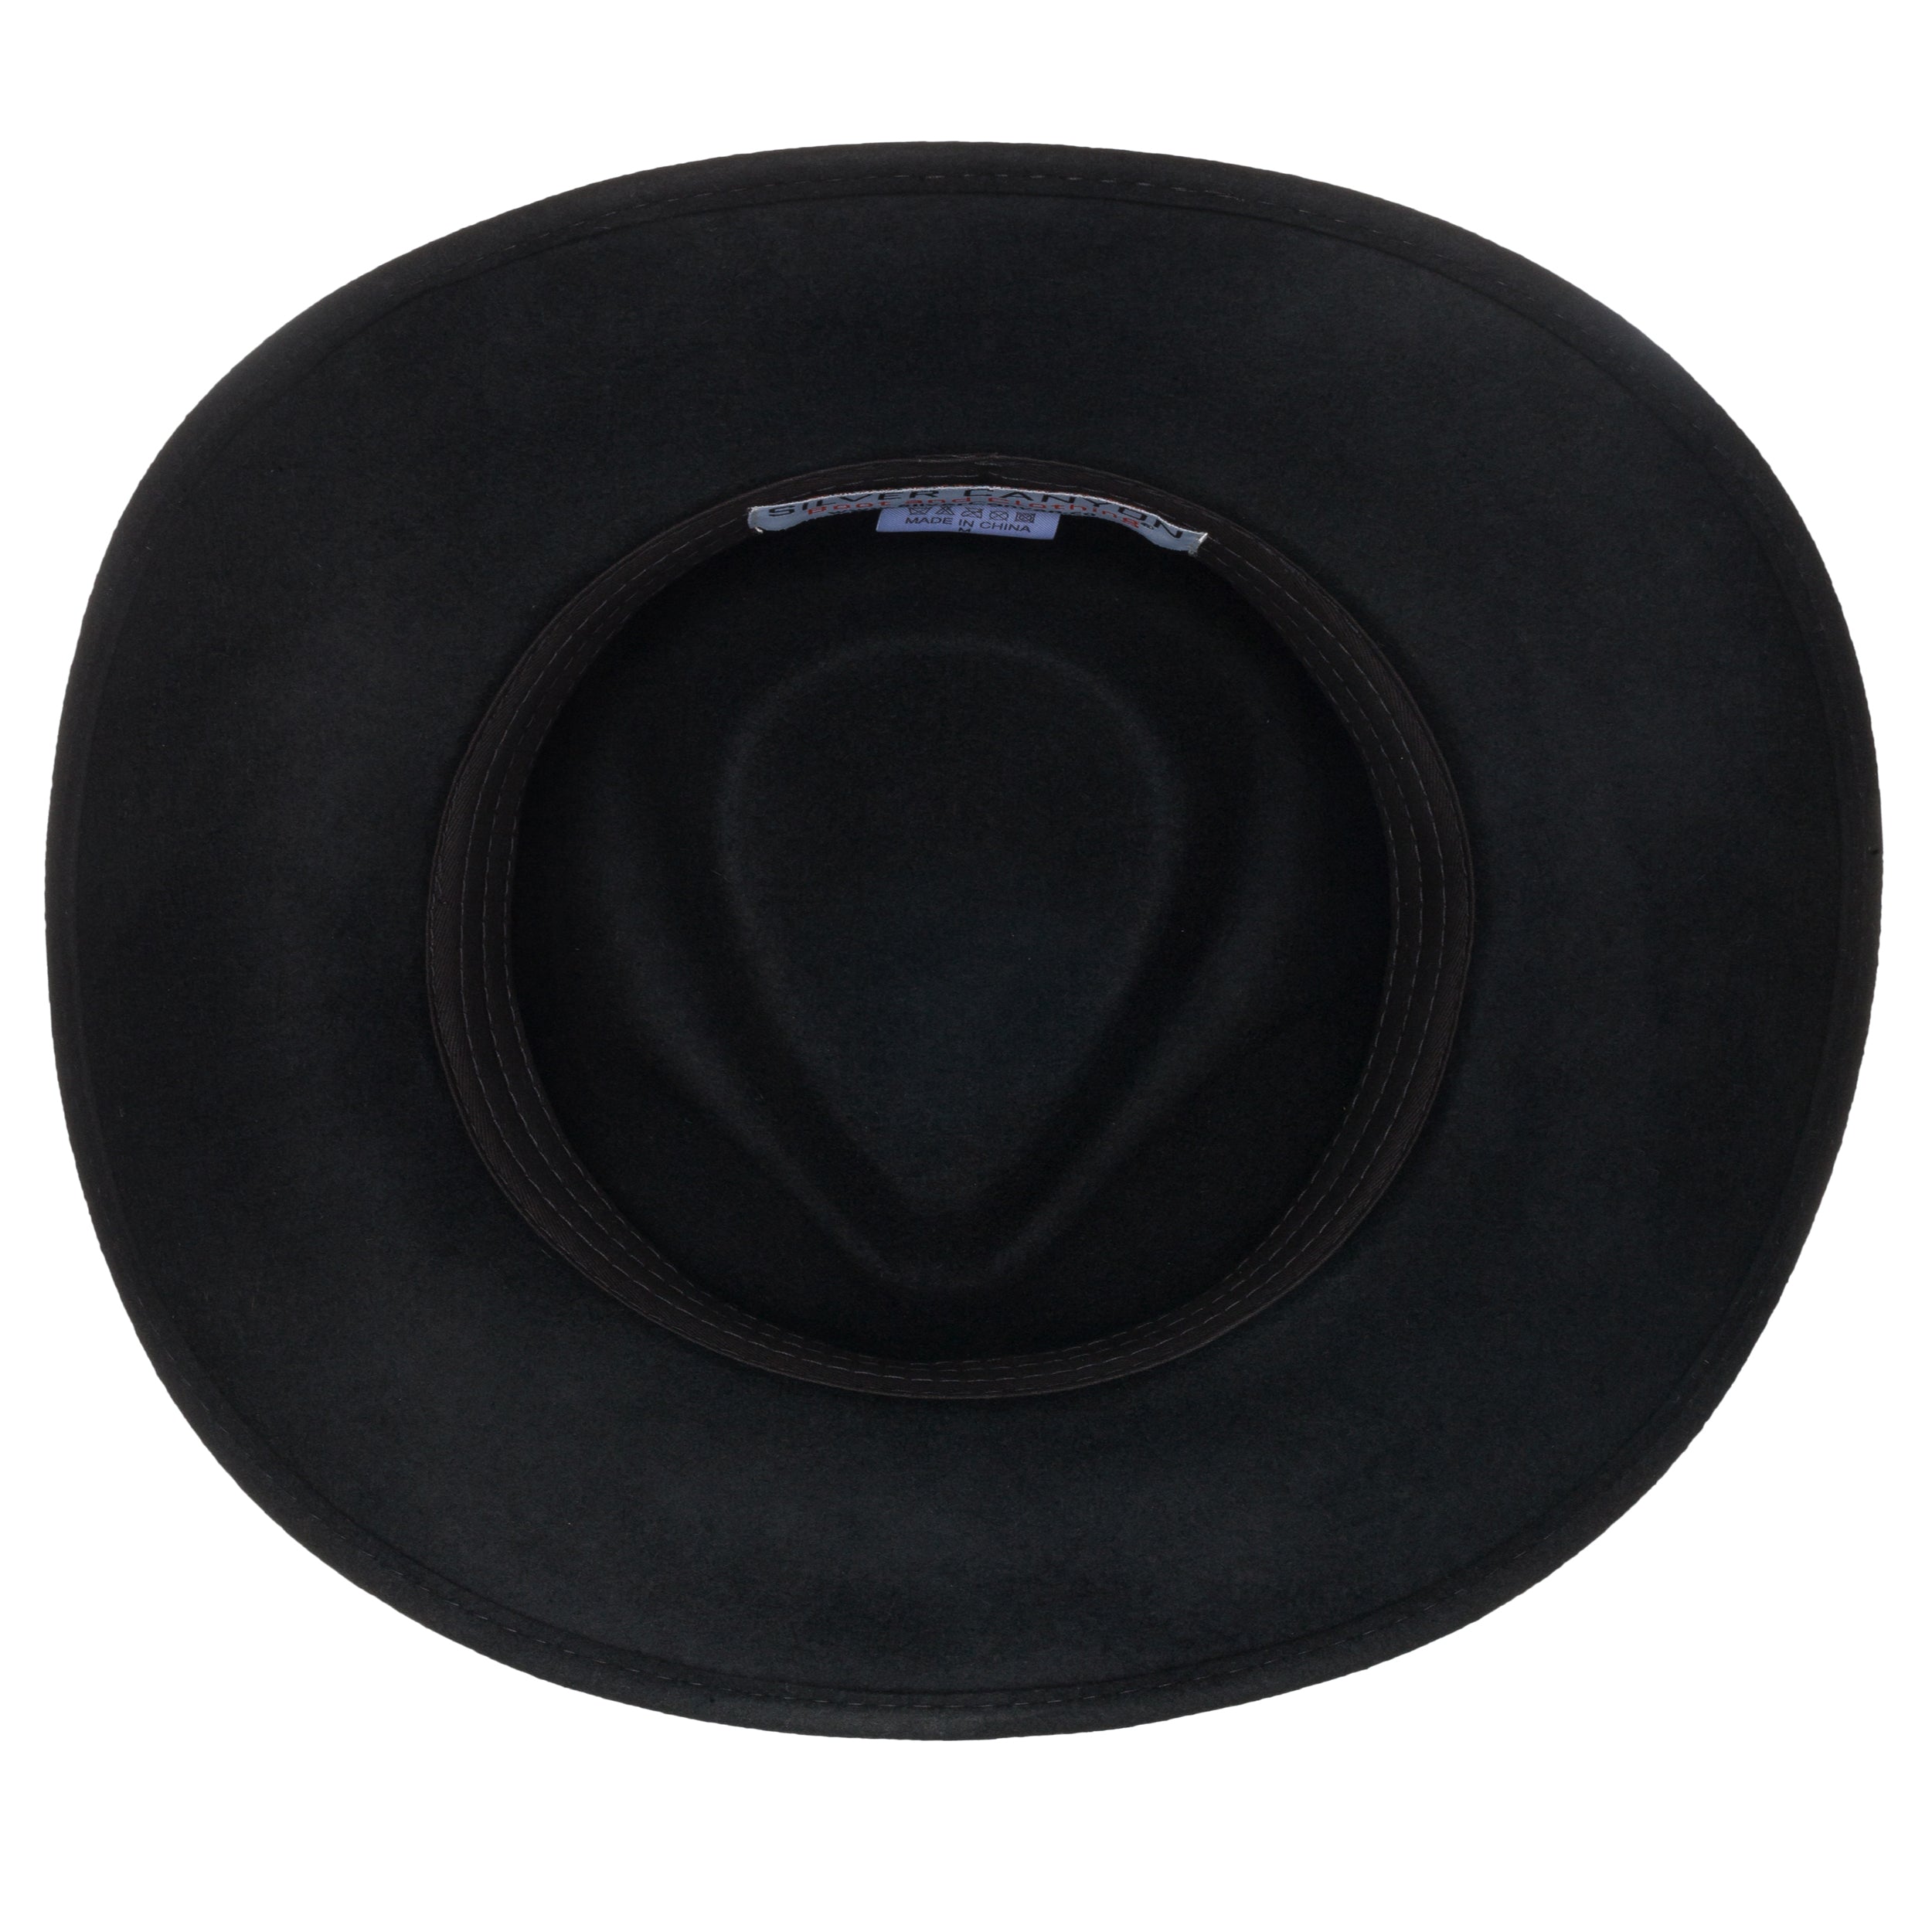 Men’s Outback Wool Cowboy Hat |Montana Black Crushable Western Felt By Silver Canyon